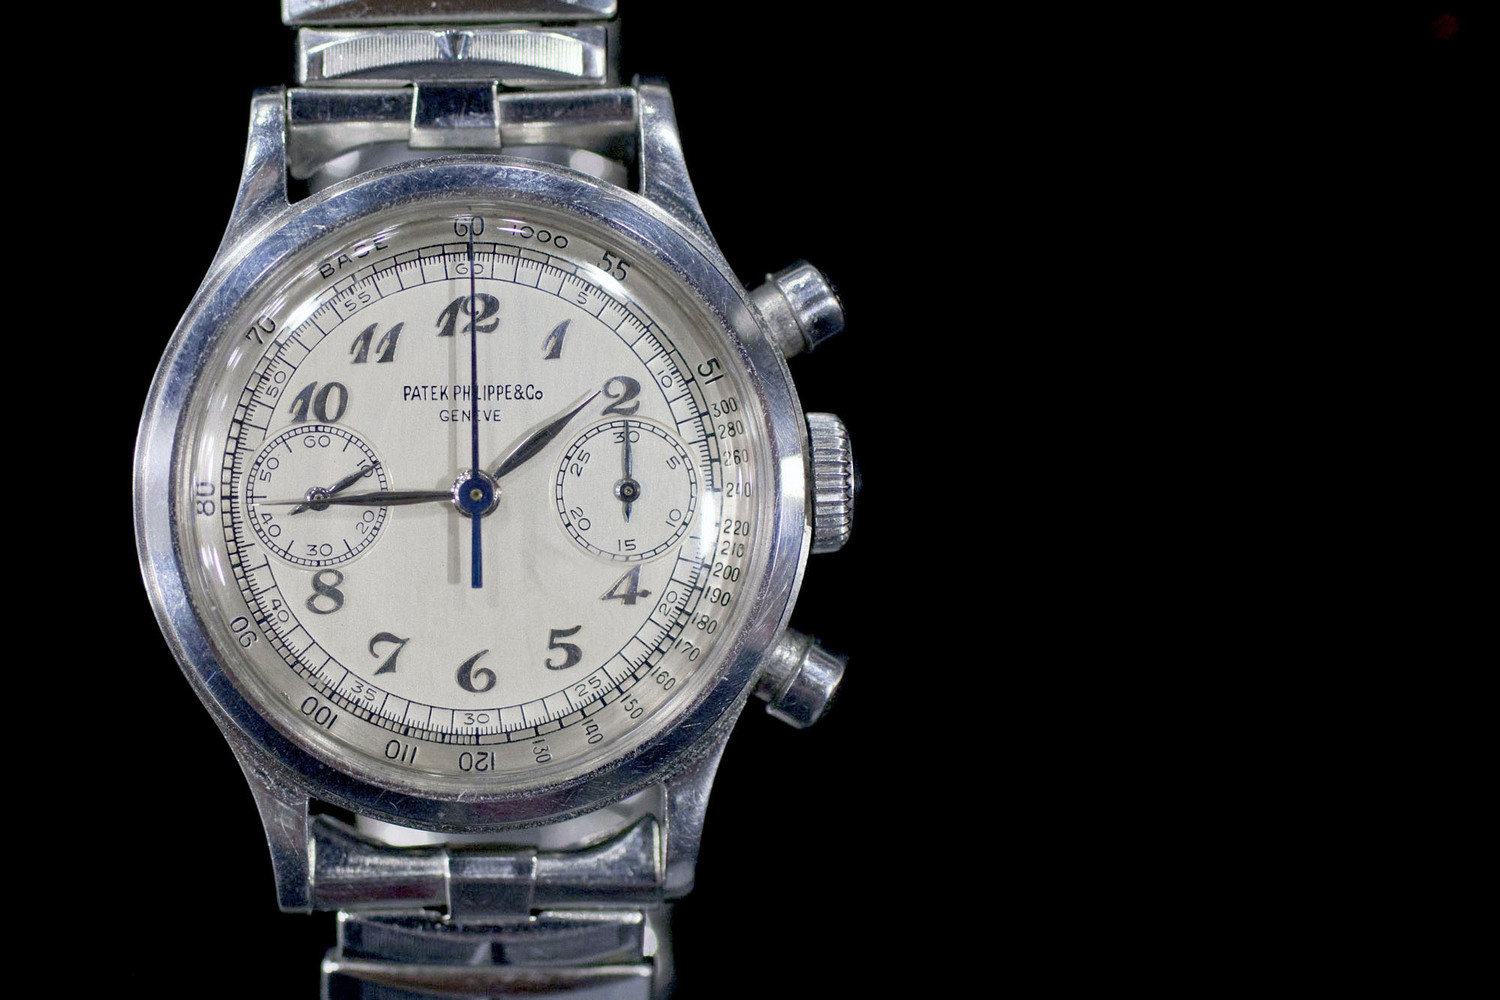 Found: A Stainless Steel Patek Philippe Ref. 1463 Chronograph